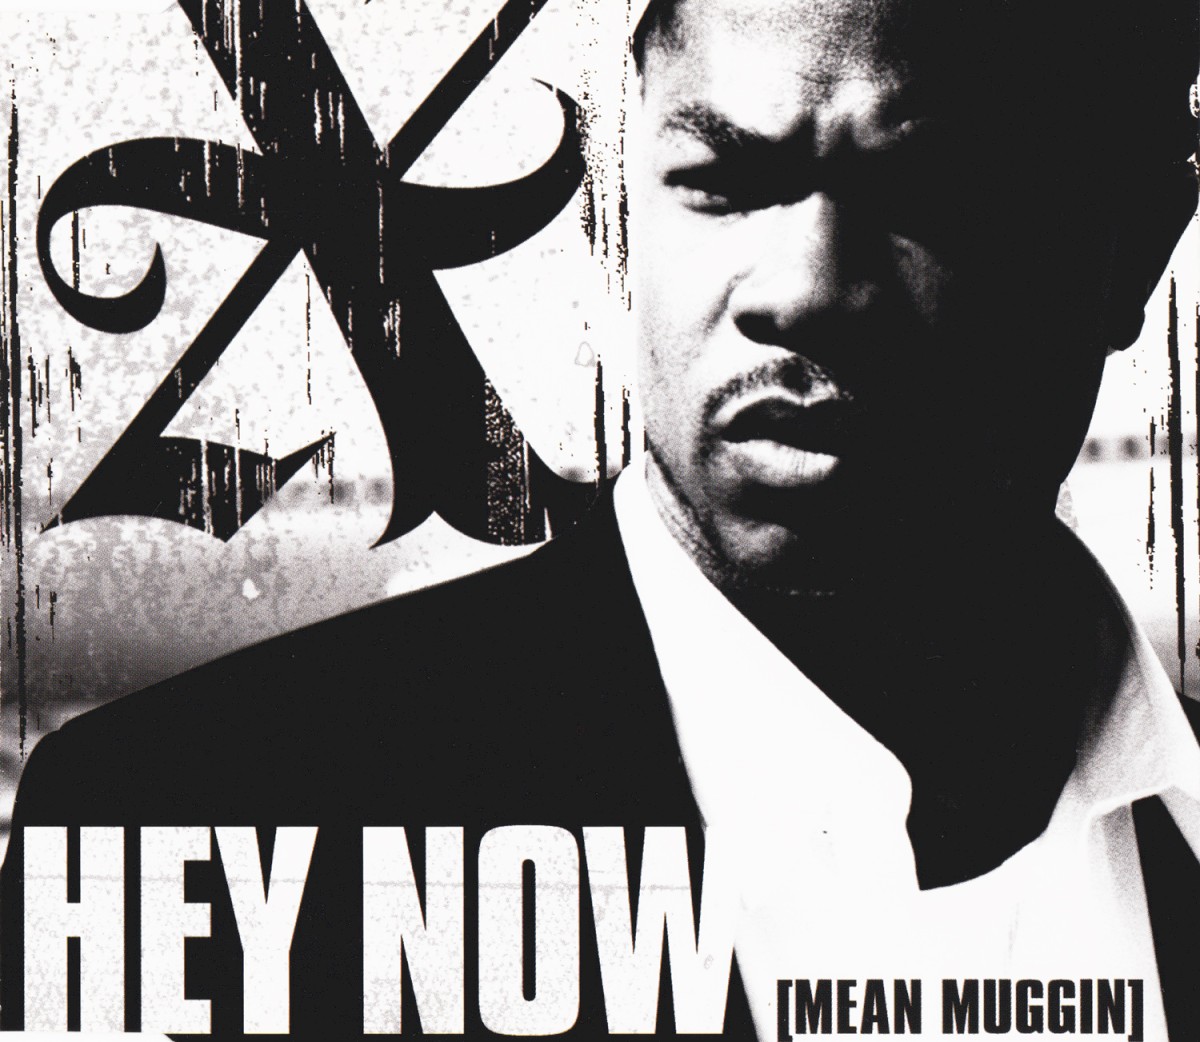 Xzibit ft. featuring Keri Hilson Hey Now (Mean Muggin) cover artwork